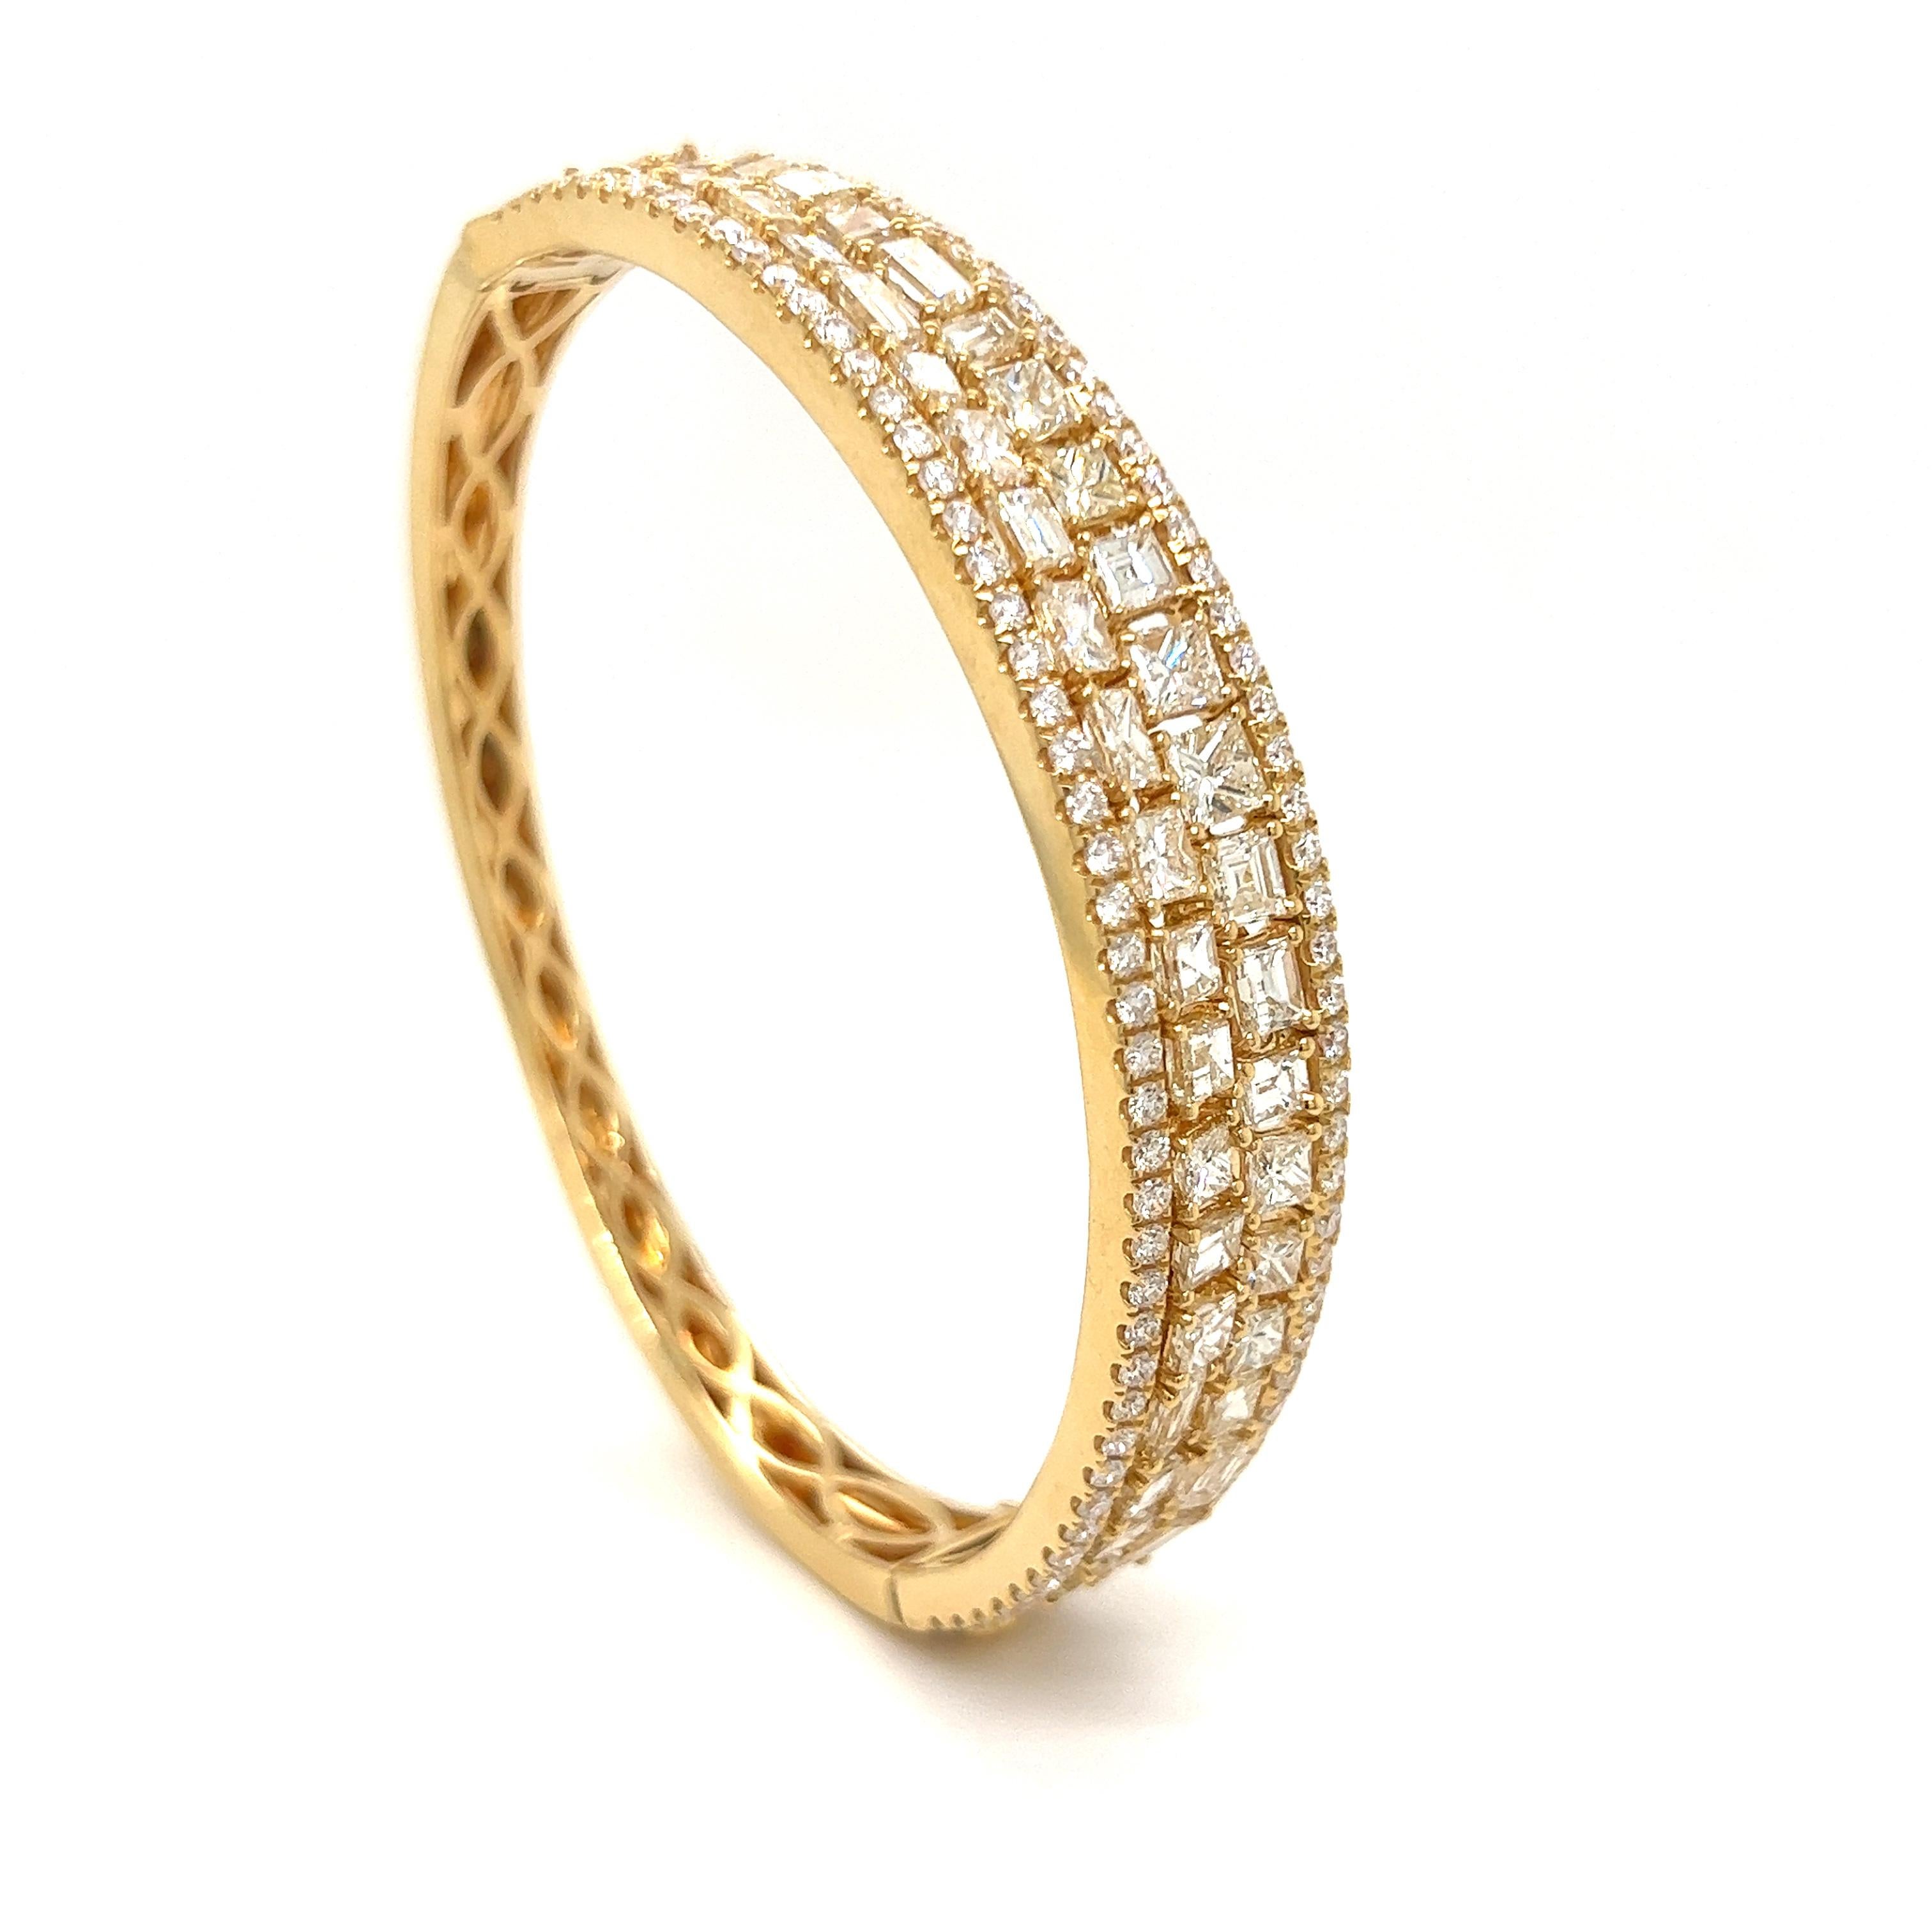 Designer 9.05 Ct Diamond and Yellow Gold Bangle In New Condition For Sale In Derby, NY